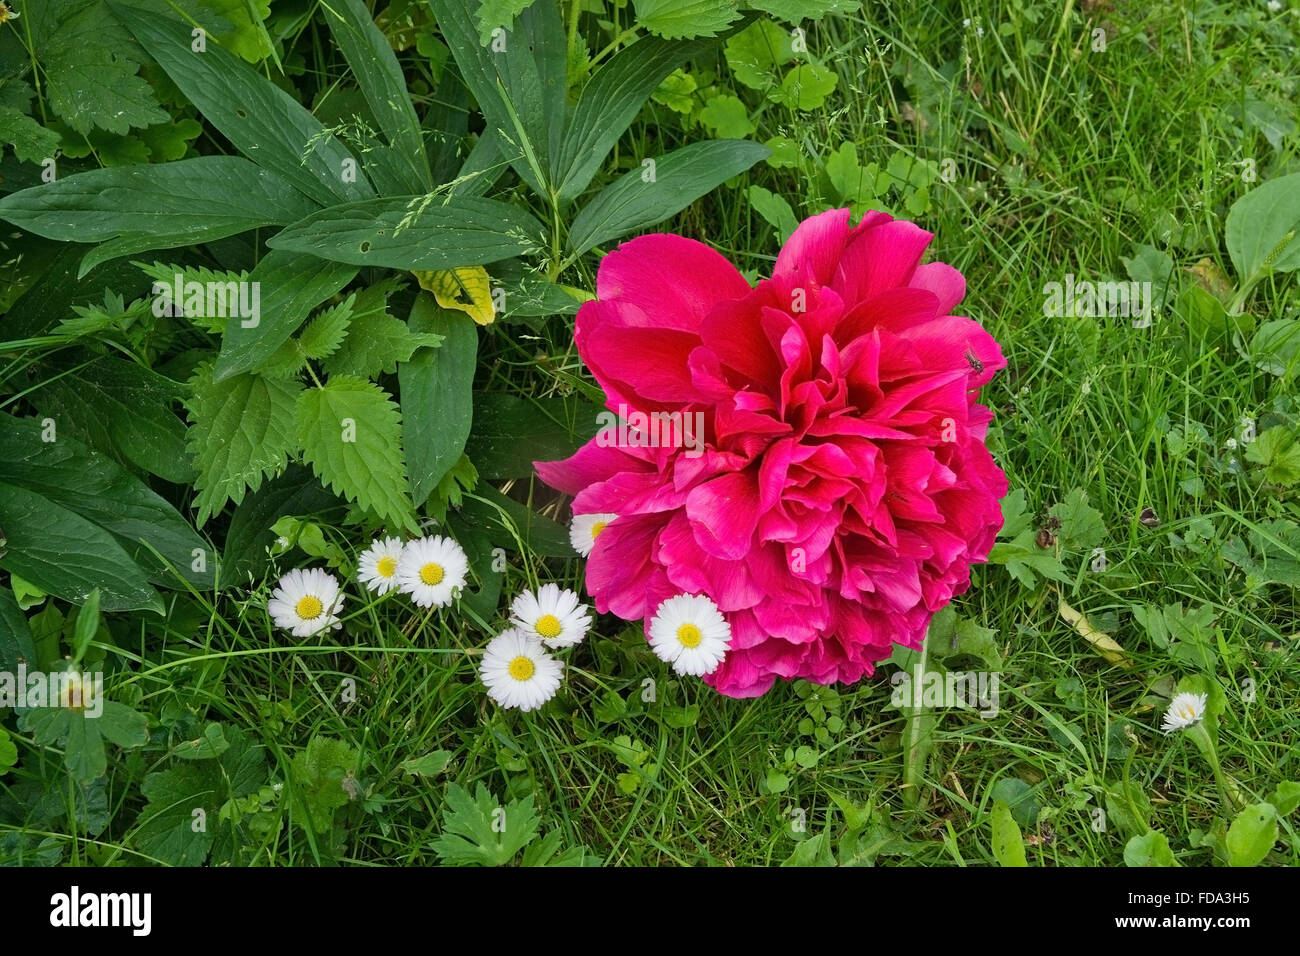 Red peony flowers growing in garden with green grass and white daisies, Sweden in June. Stock Photo